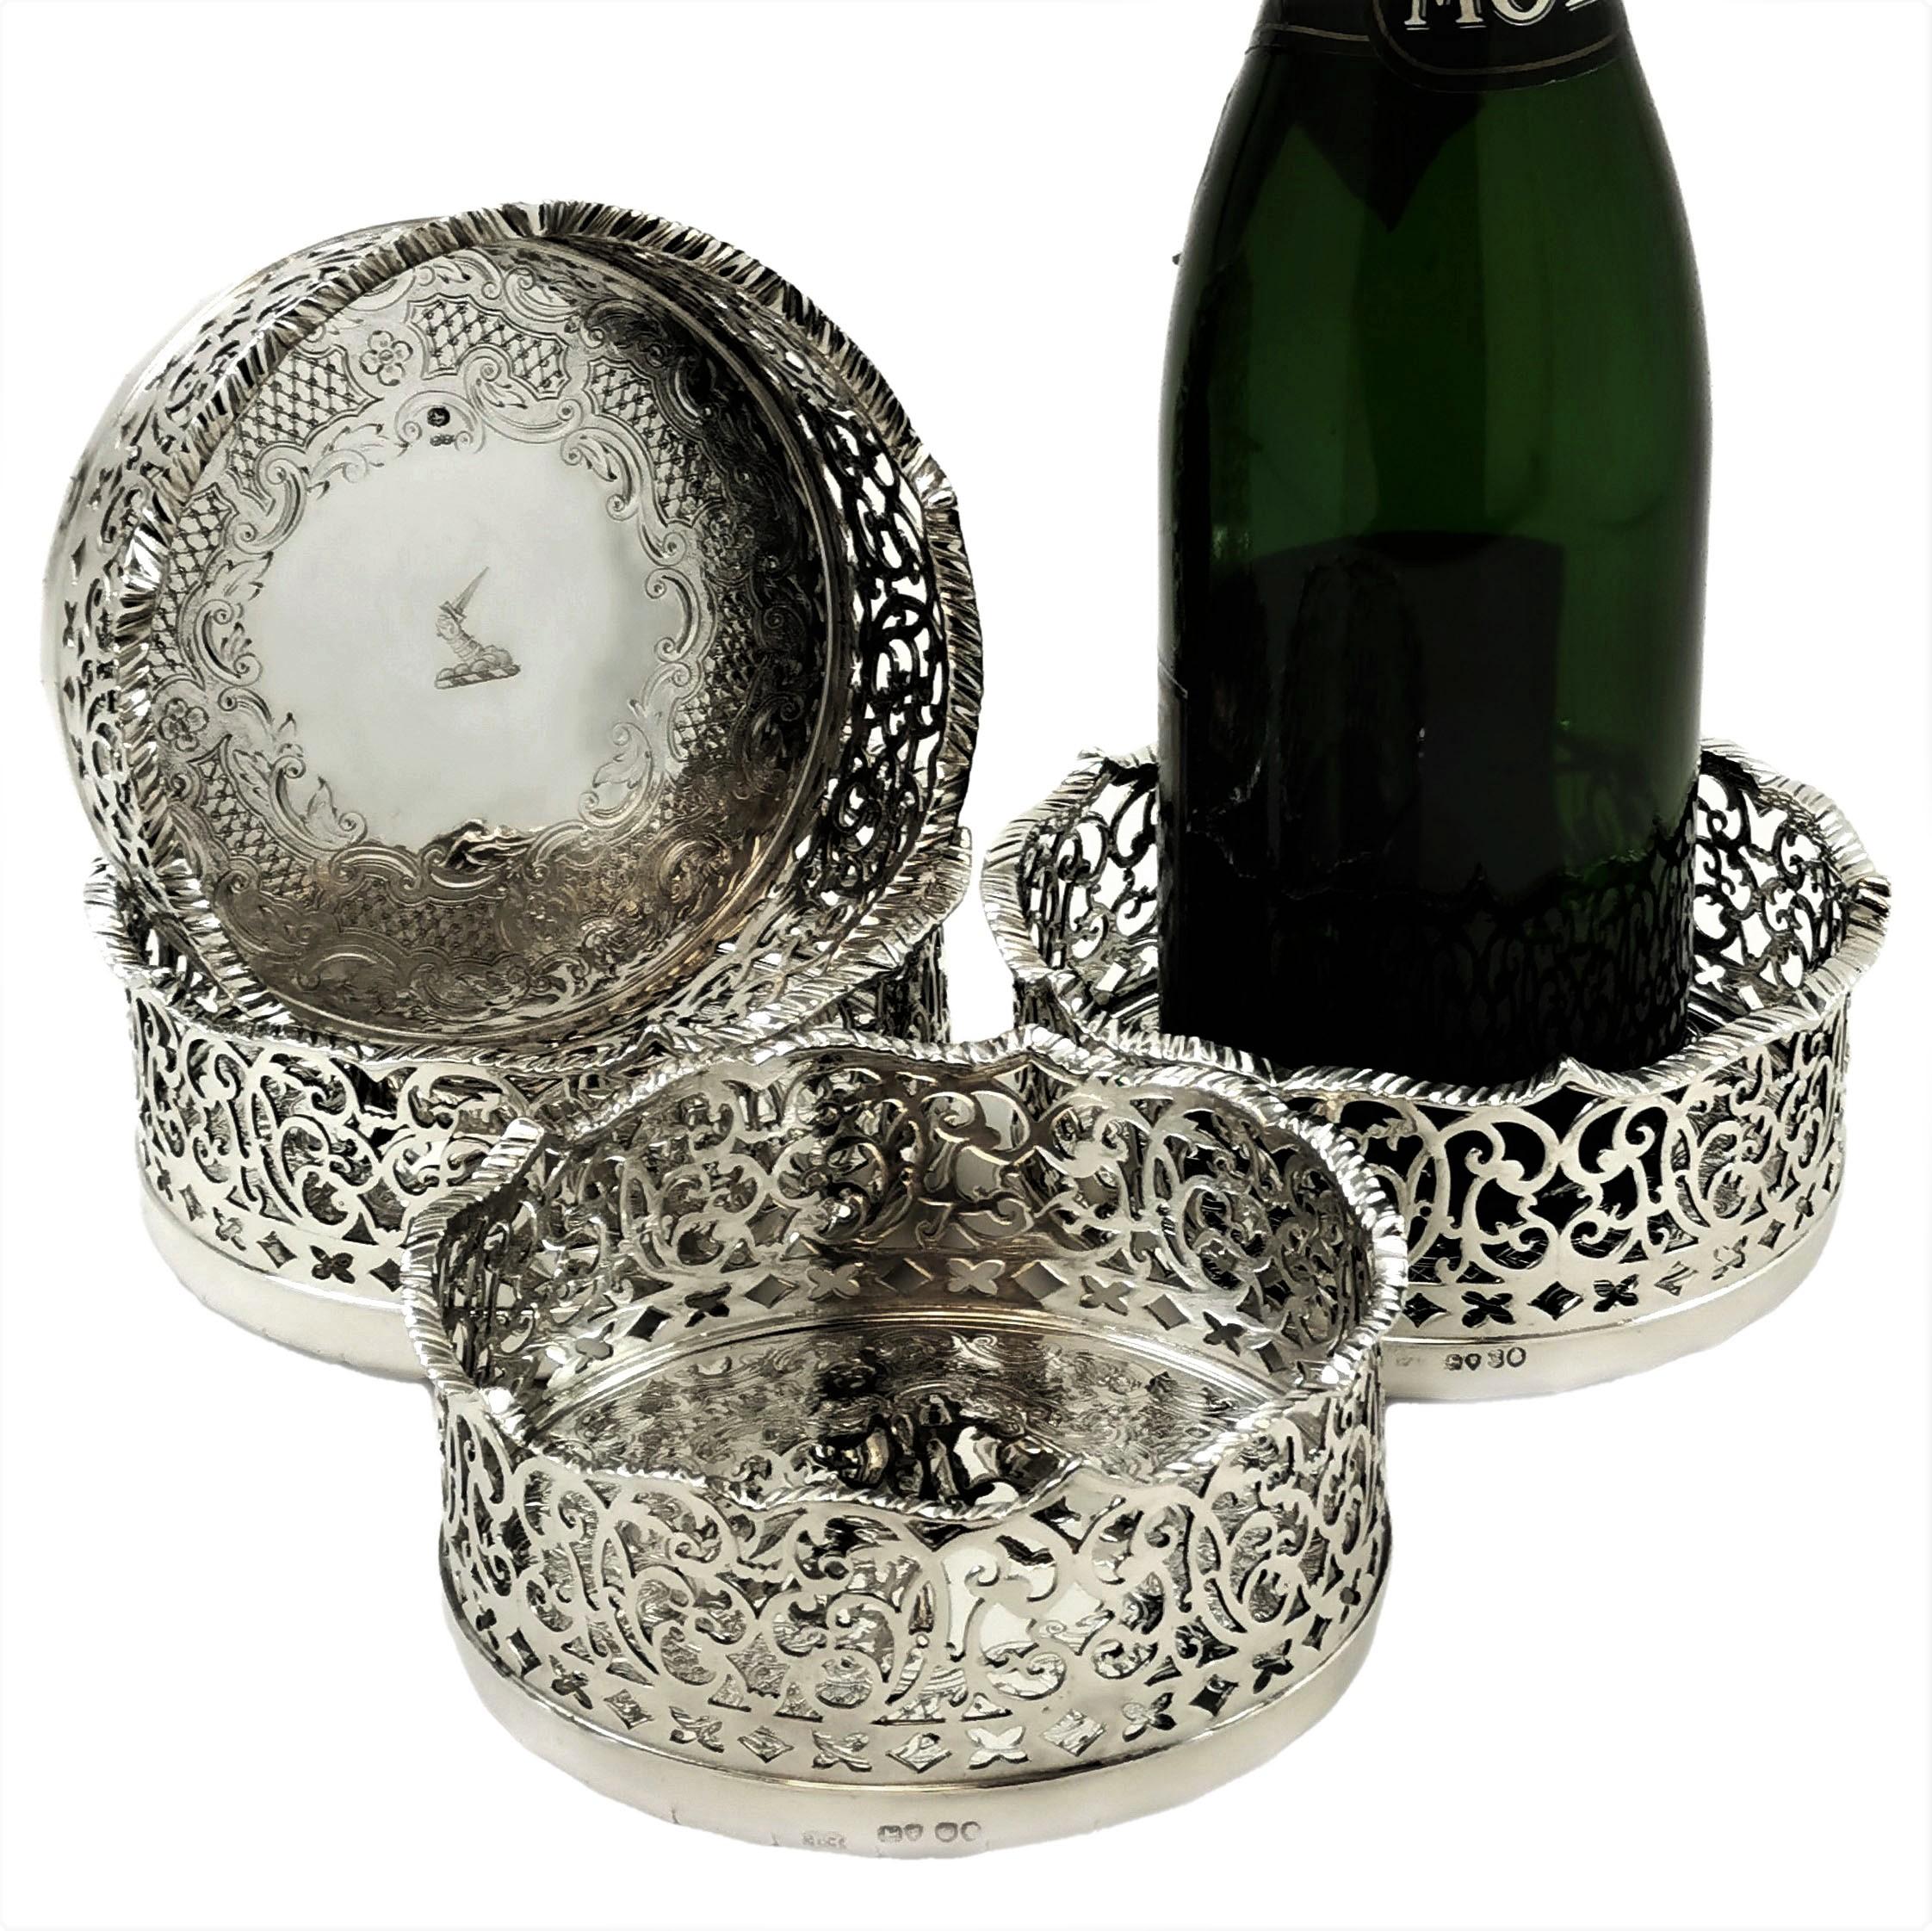 A magnificent set of four Antique Solid Silver Bottle Coasters. Each Coaster has a tall, ornate pierced sides with a shaped rim. The interior of each Coaster is decorated with a delicate complementary engraved design around an engraved crest. These